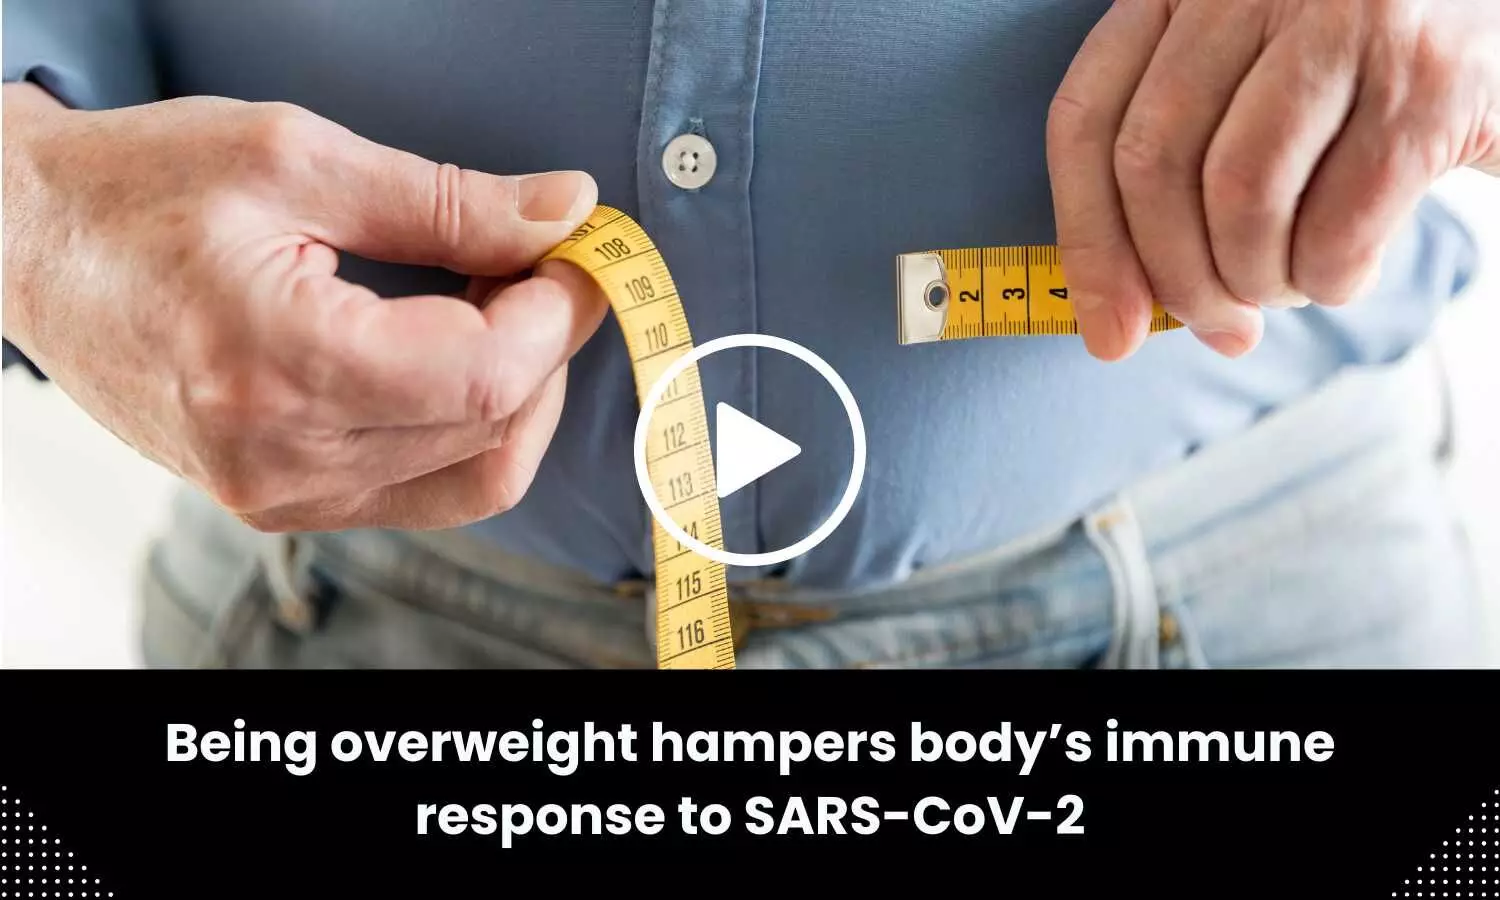 Being overweight hampers bodys immune response to SARS-CoV-2